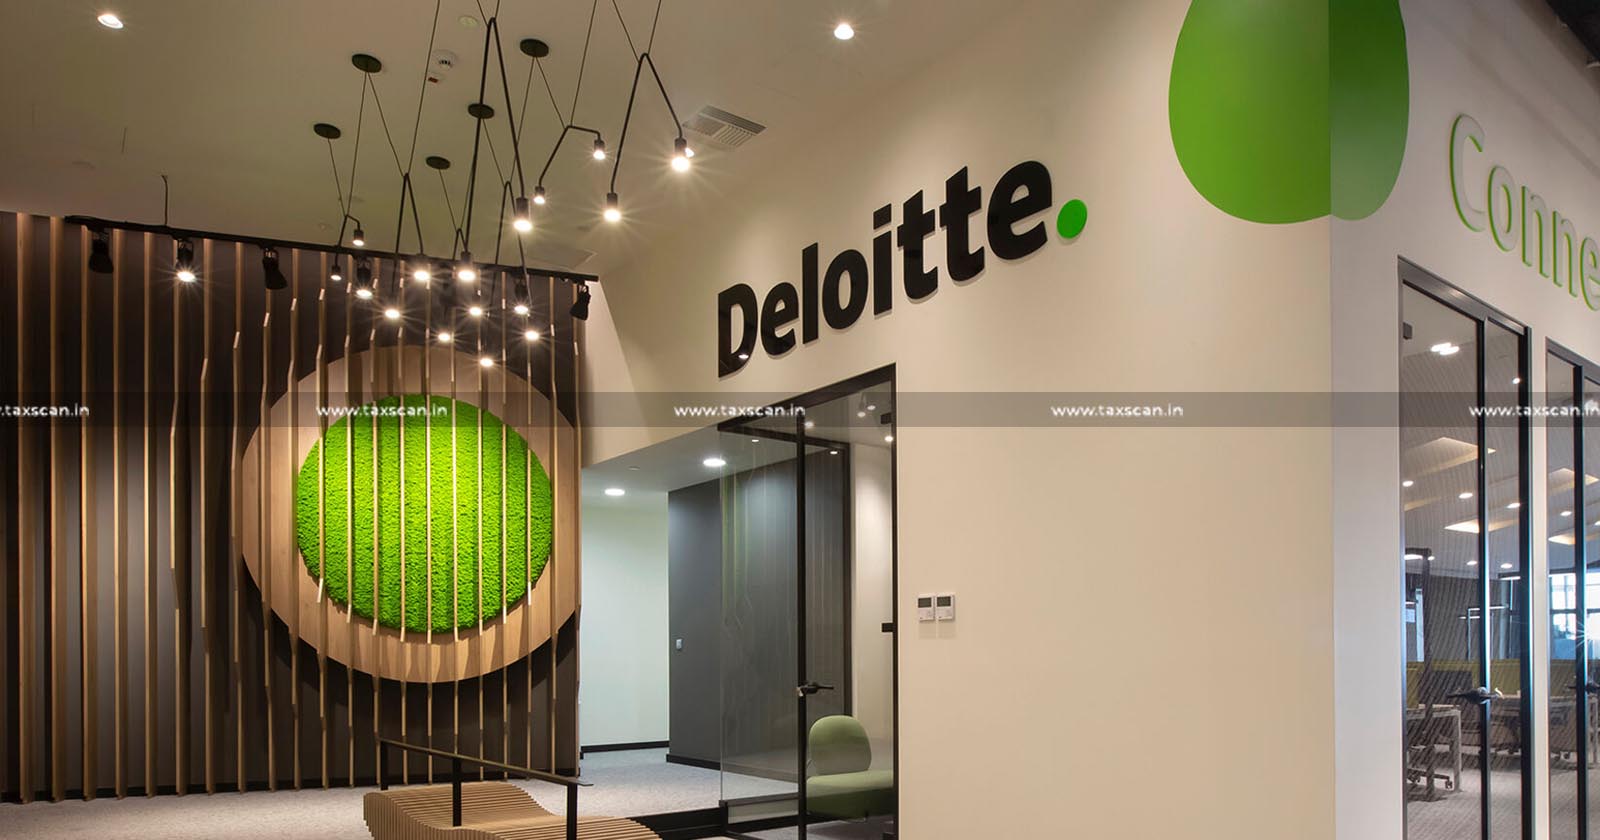 Chartered Accountant Vacancies - Chartered Accountant Vacancies In Deloitte - Chartered Accountant Job Opportunities In Deloitte - Chartered Accountant Careers In Deloitte - TAXSCAN